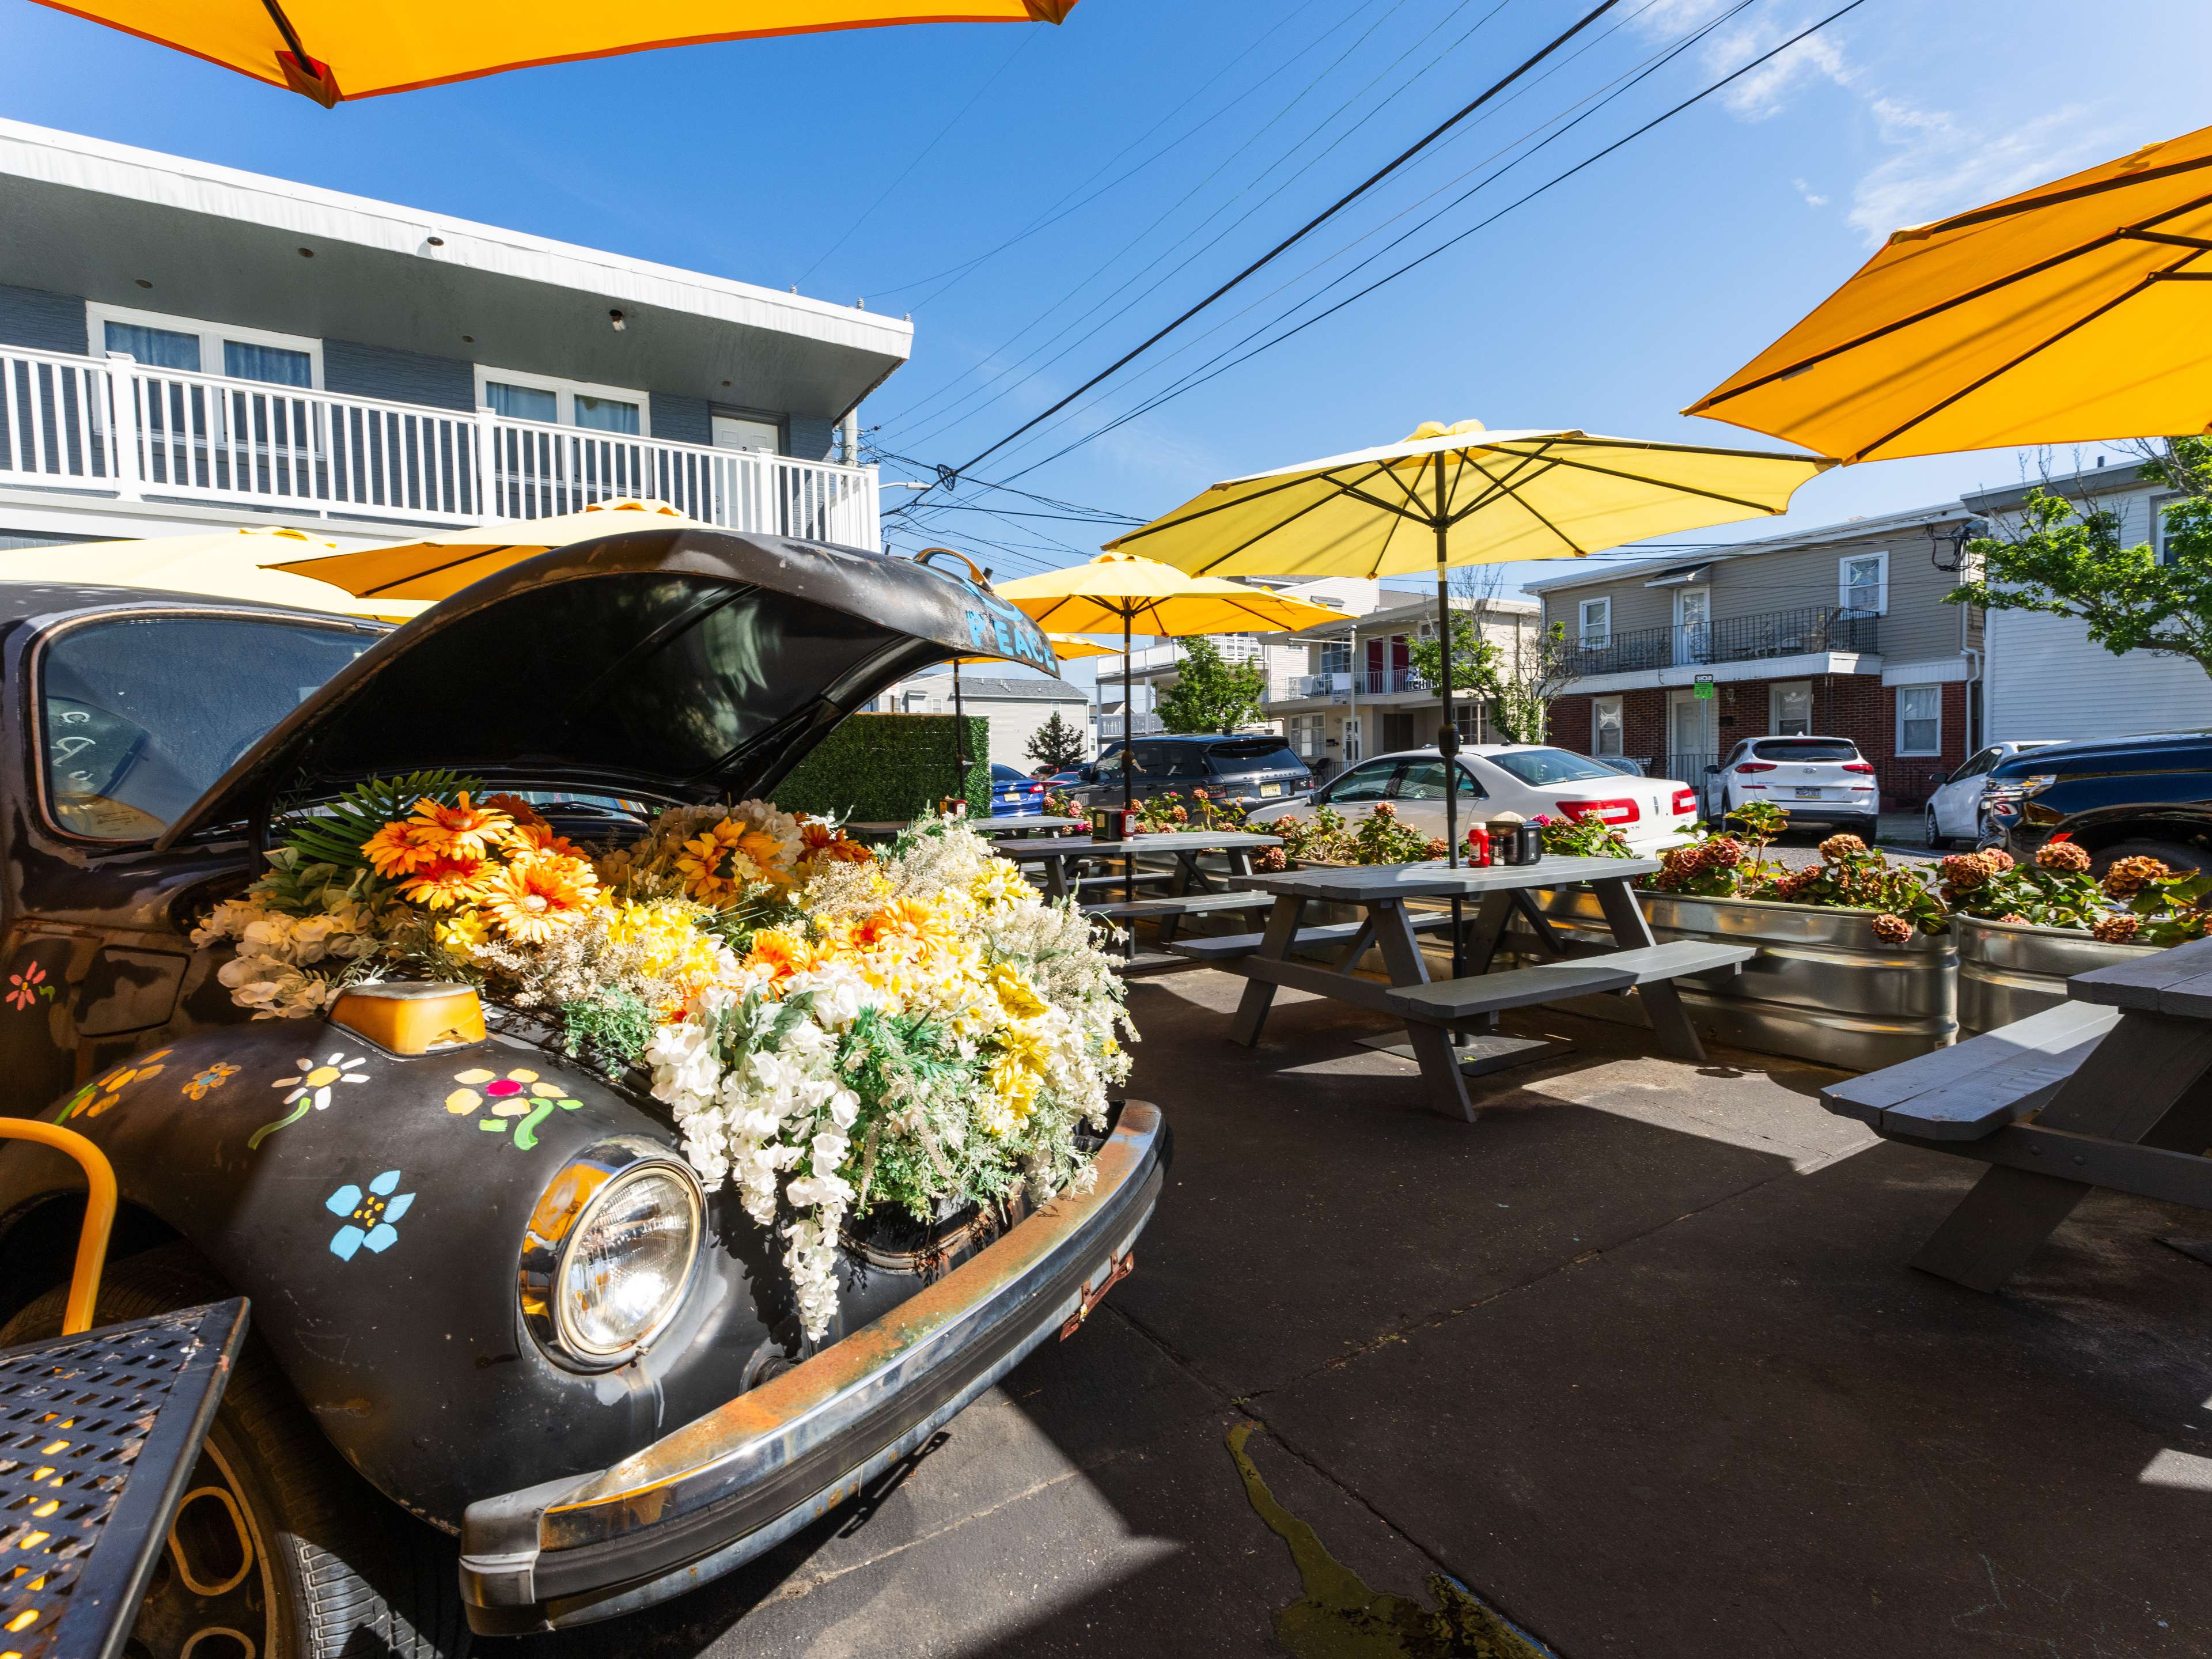 exterior of bagel shop with picnic tables and colorful umbrellas and an old car with fake flowers in the hood